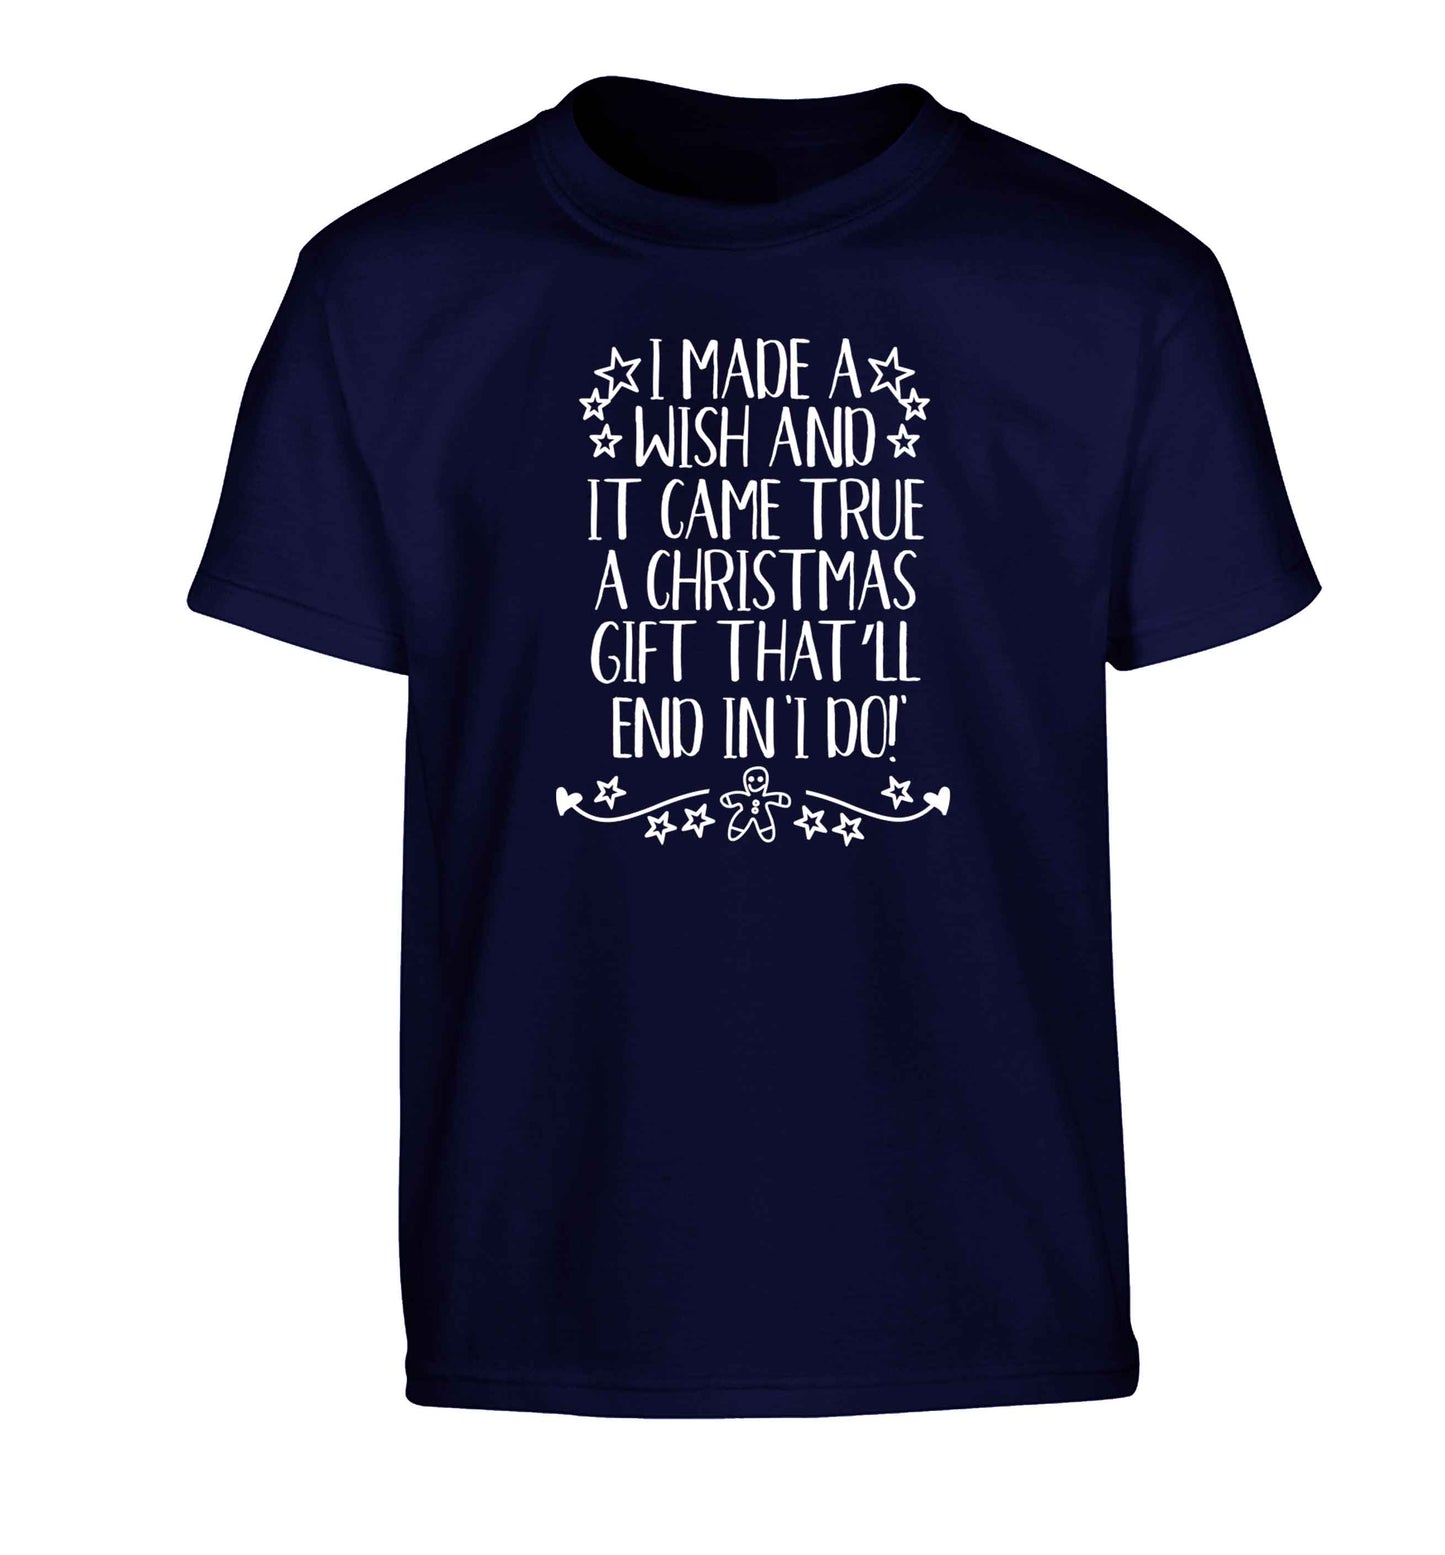 I made a wish and it came true a Christmas gift that'll end in 'I do' Children's navy Tshirt 12-13 Years